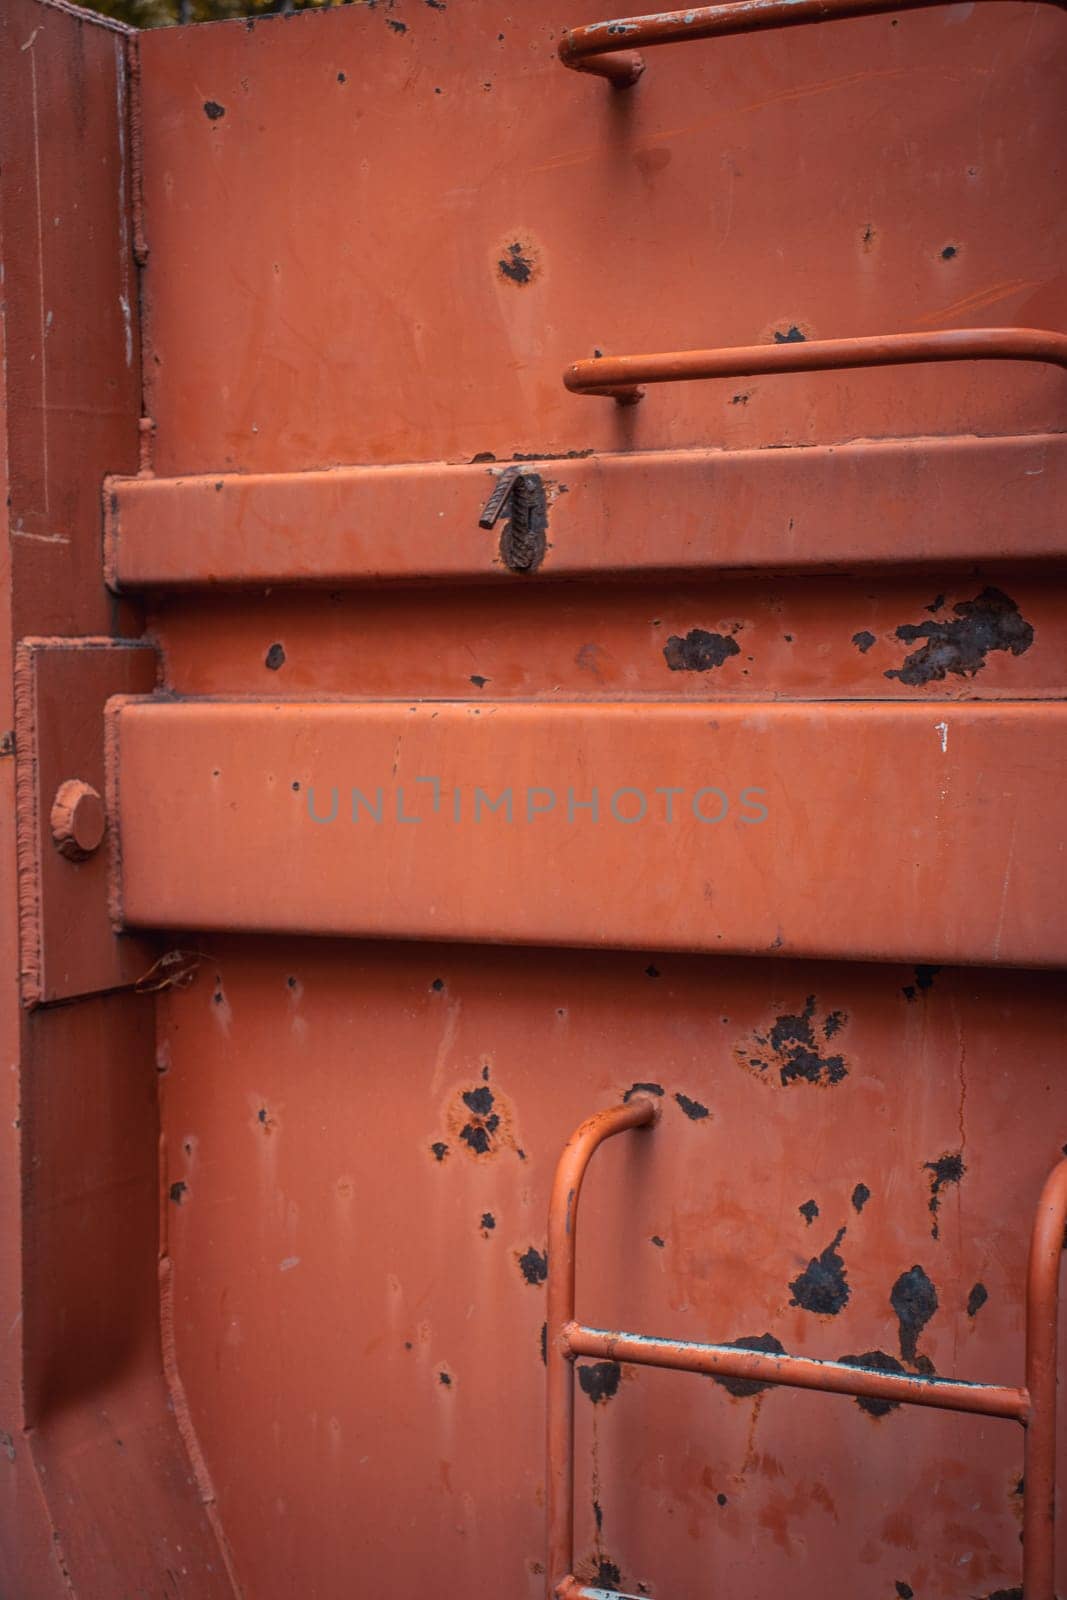 Close up industrial red containers box concept photo. Cargo freight ship for import export image. High quality picture for wallpaper. Suitable for background images and abstract illustrations.